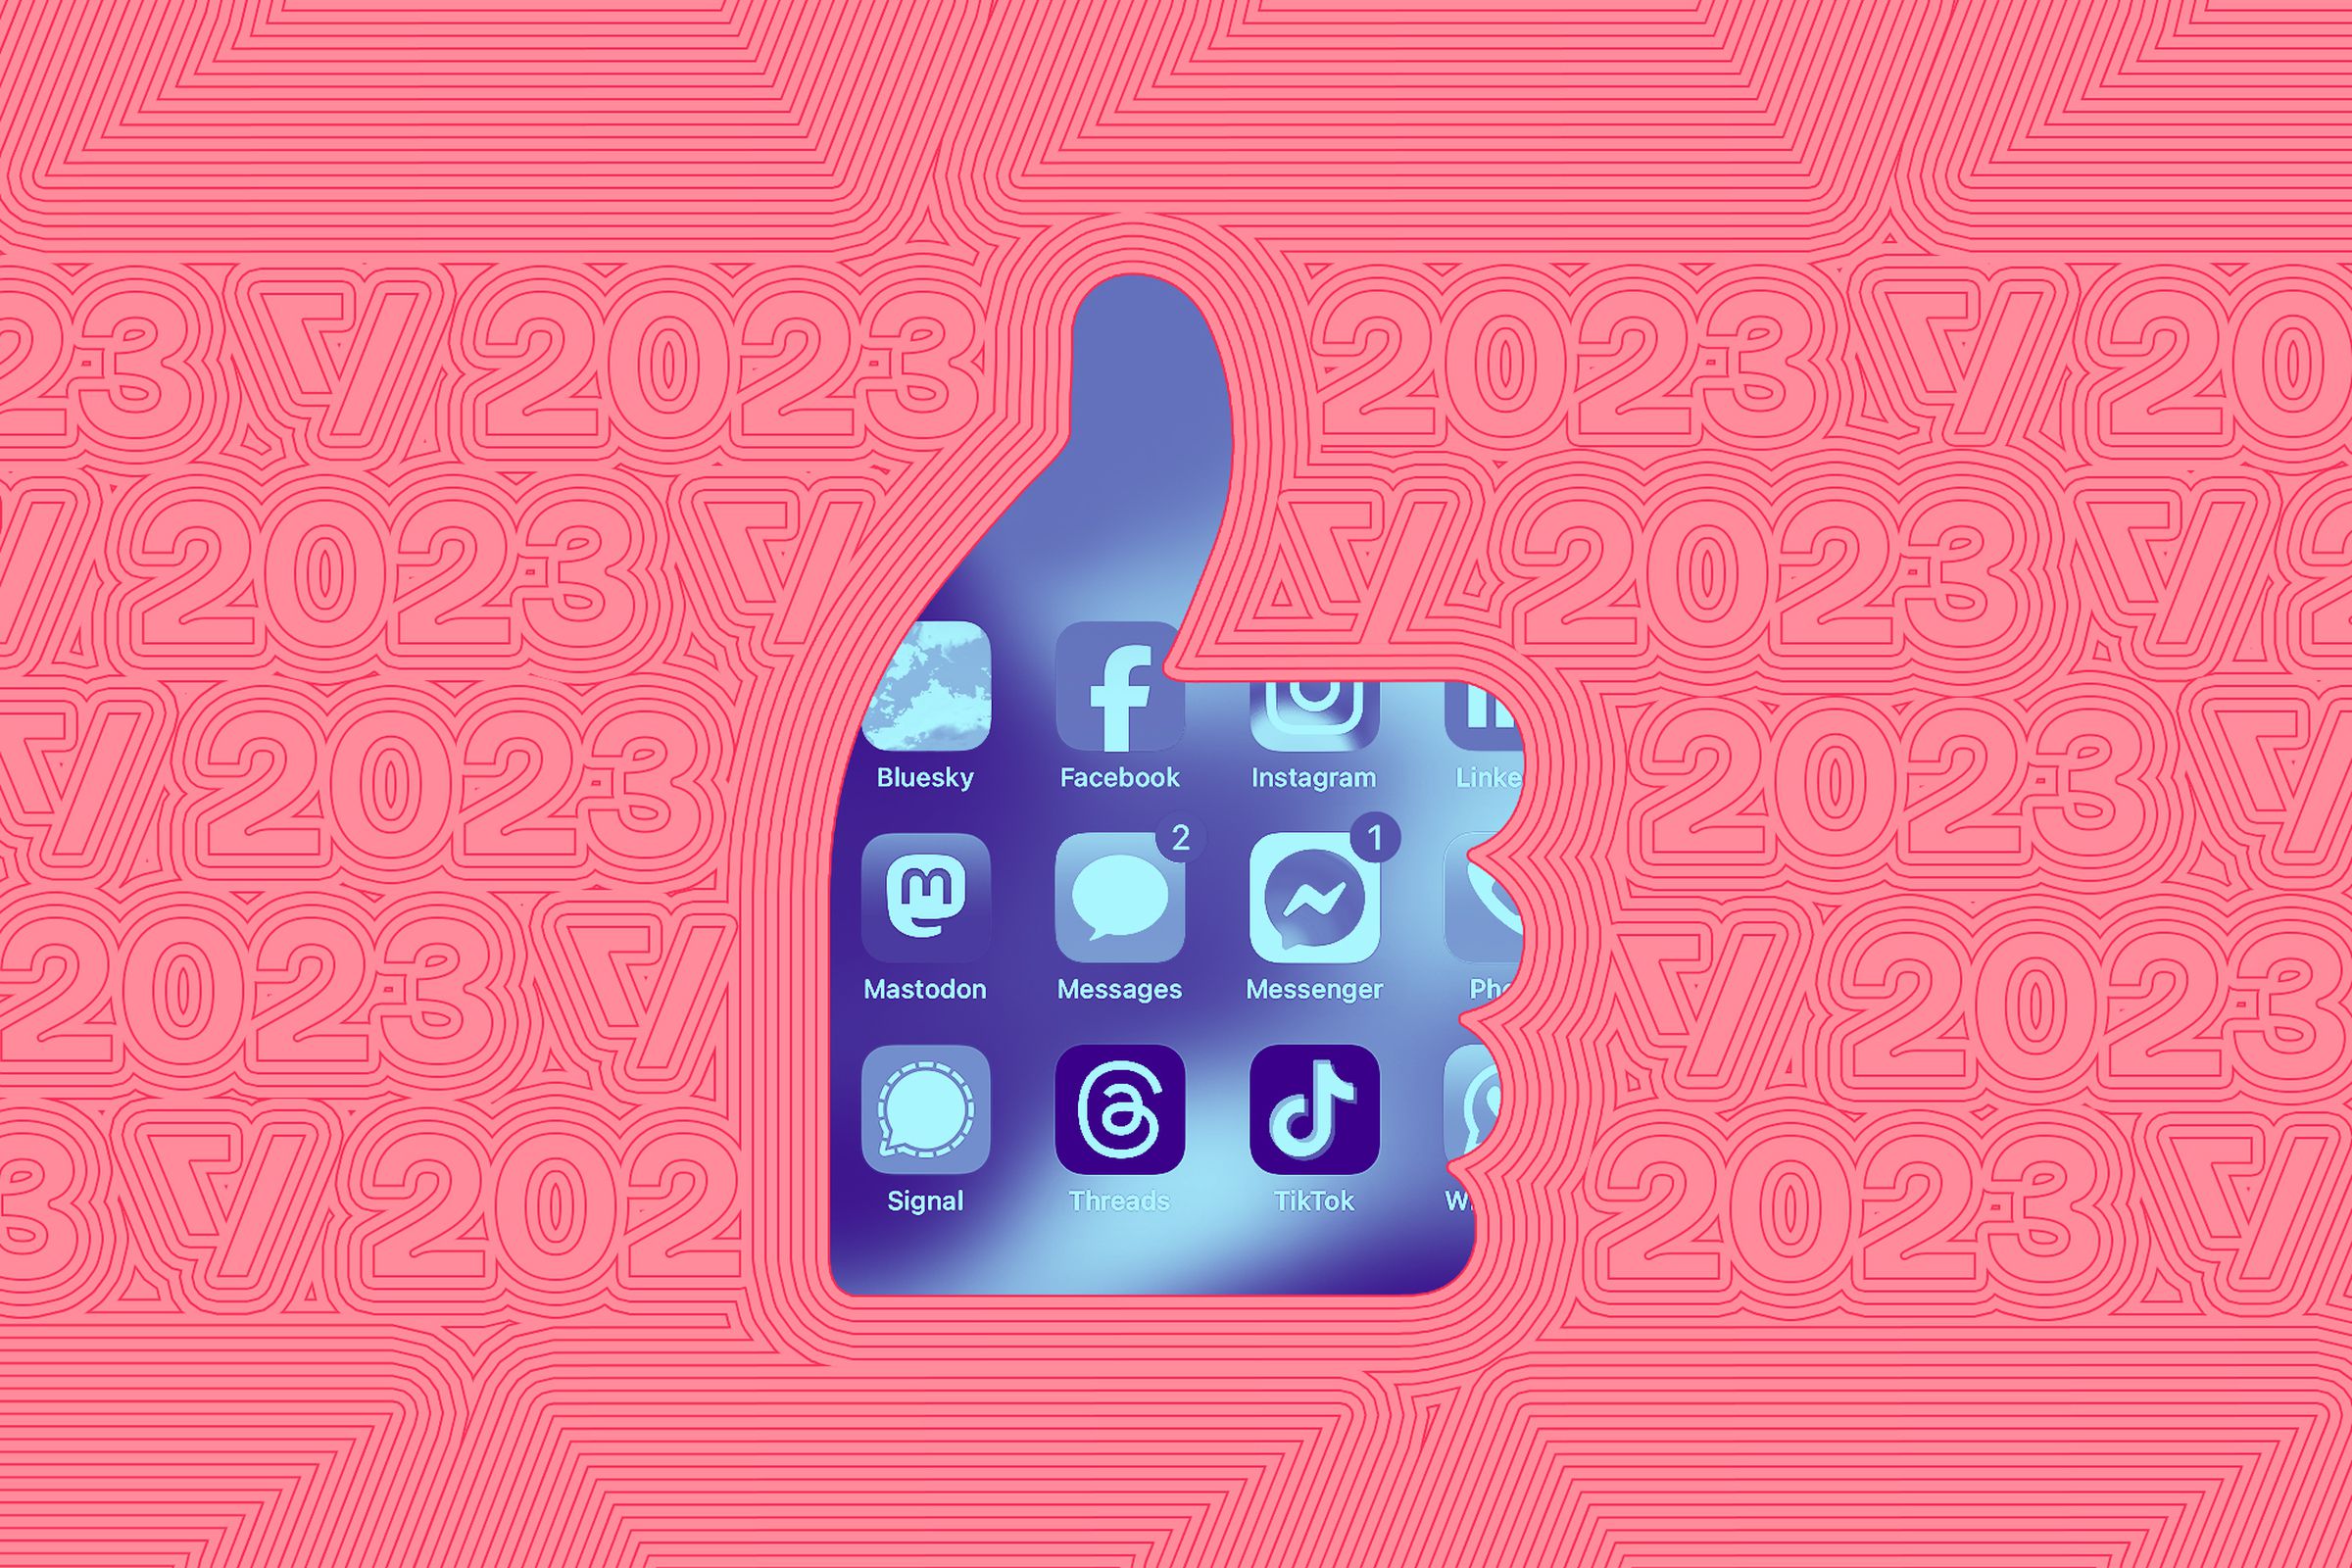 2023 in social media: the case for the fediverse